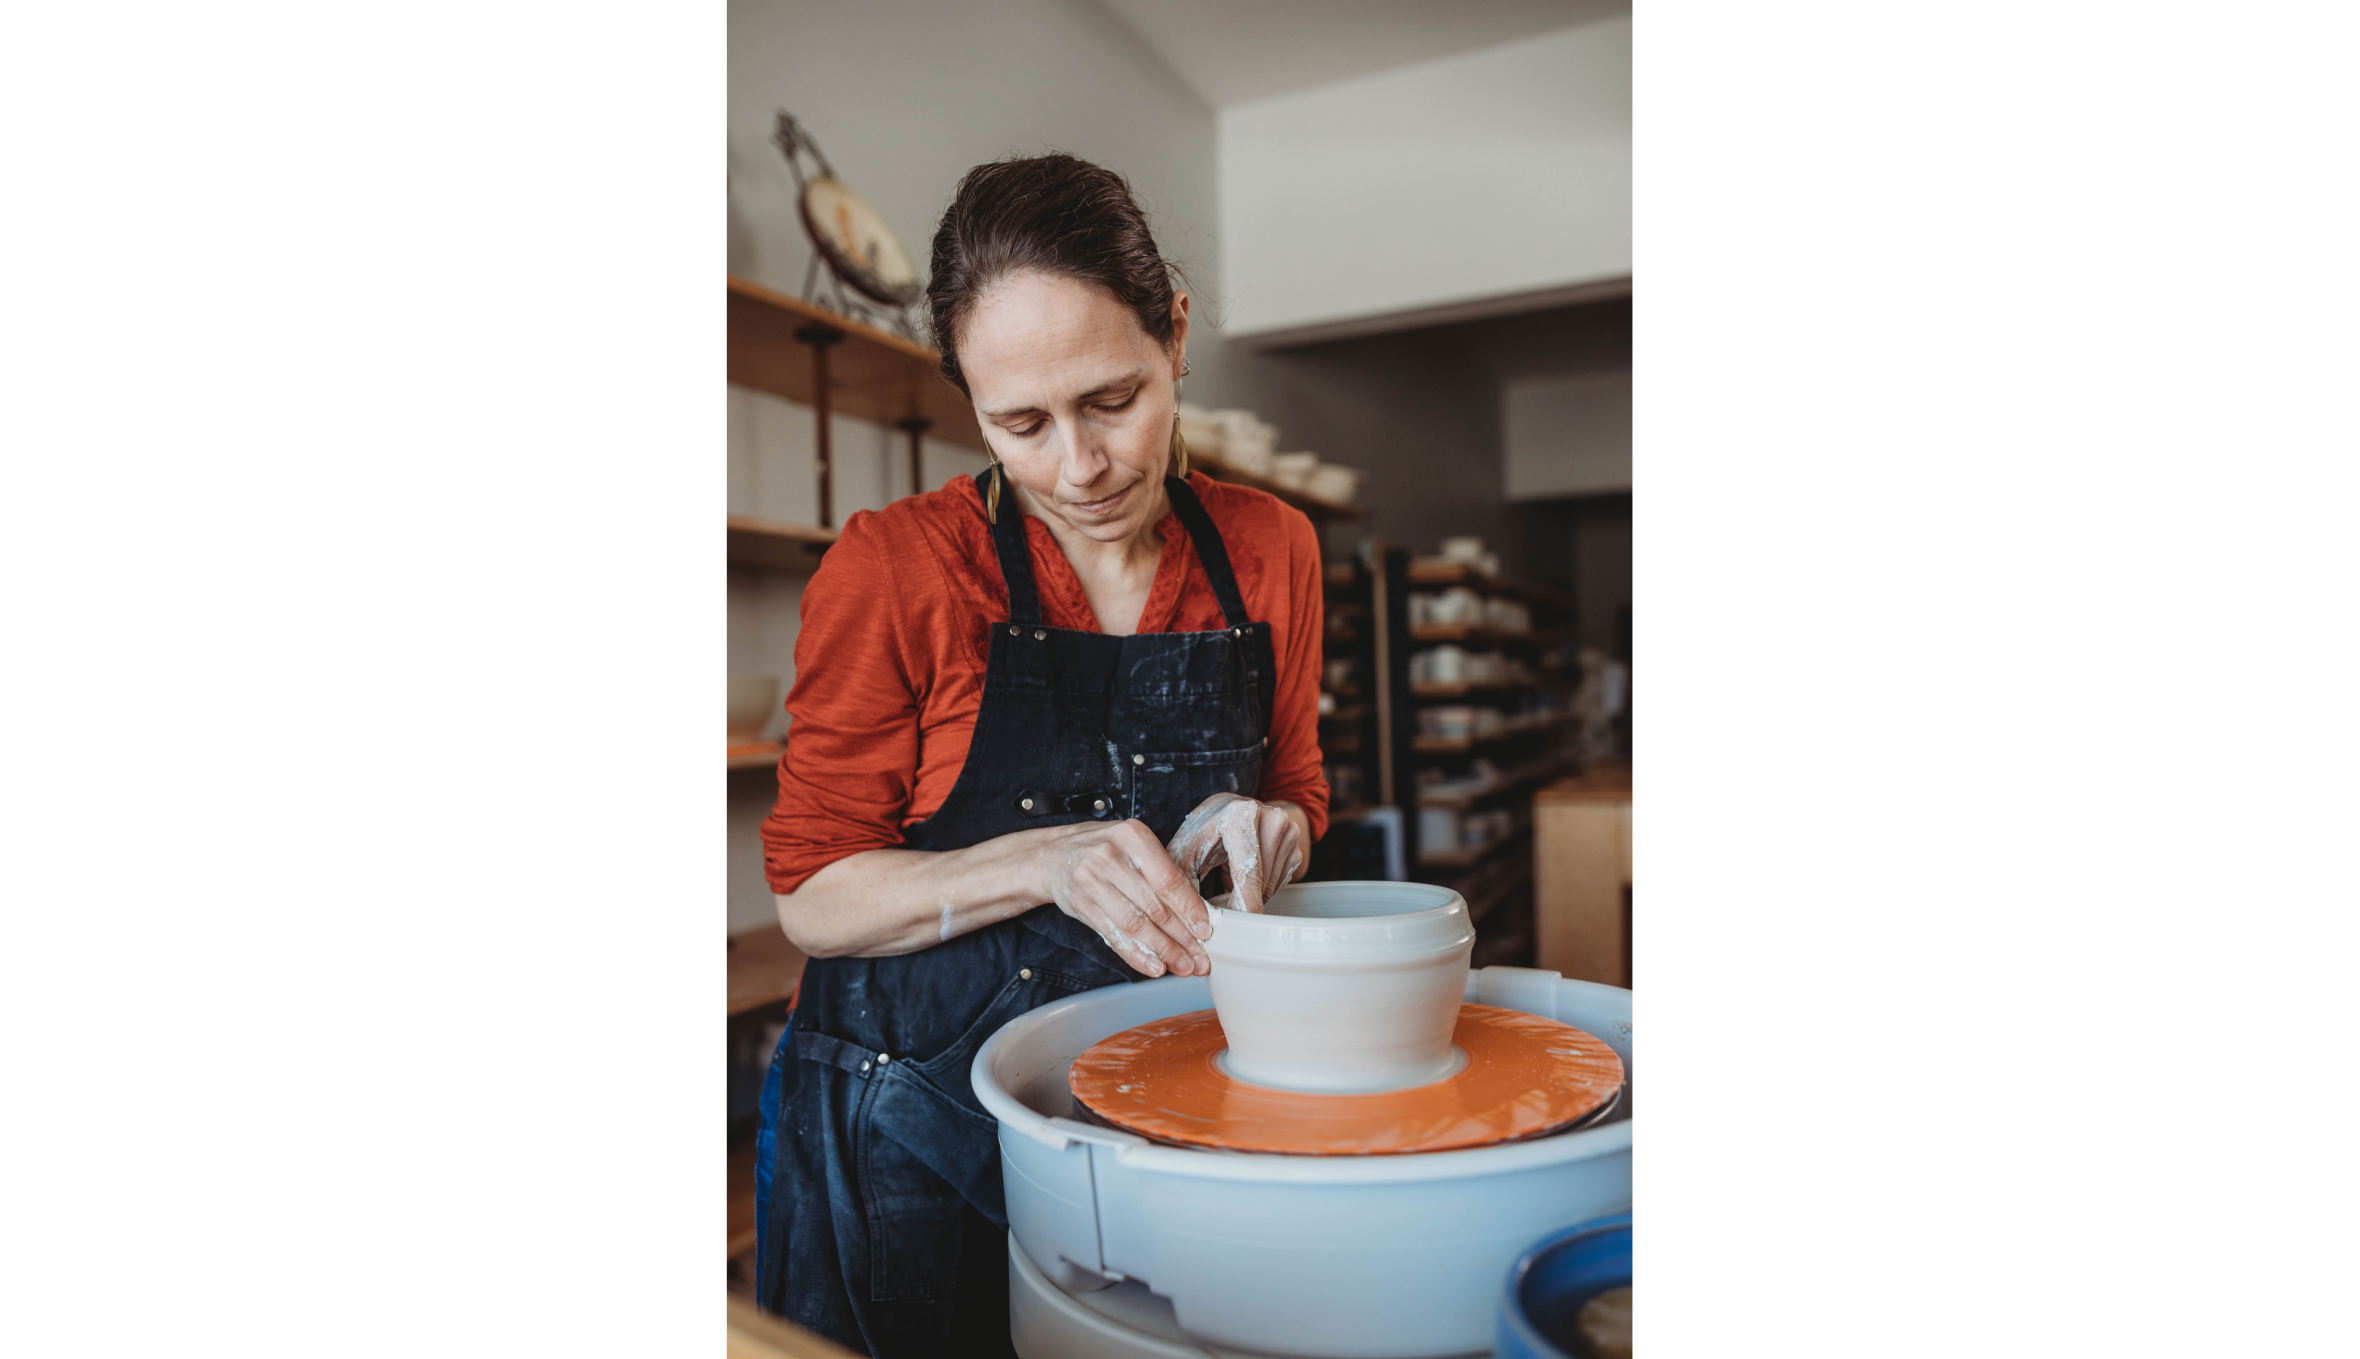 Pots Made With Love - The Vegan Potter